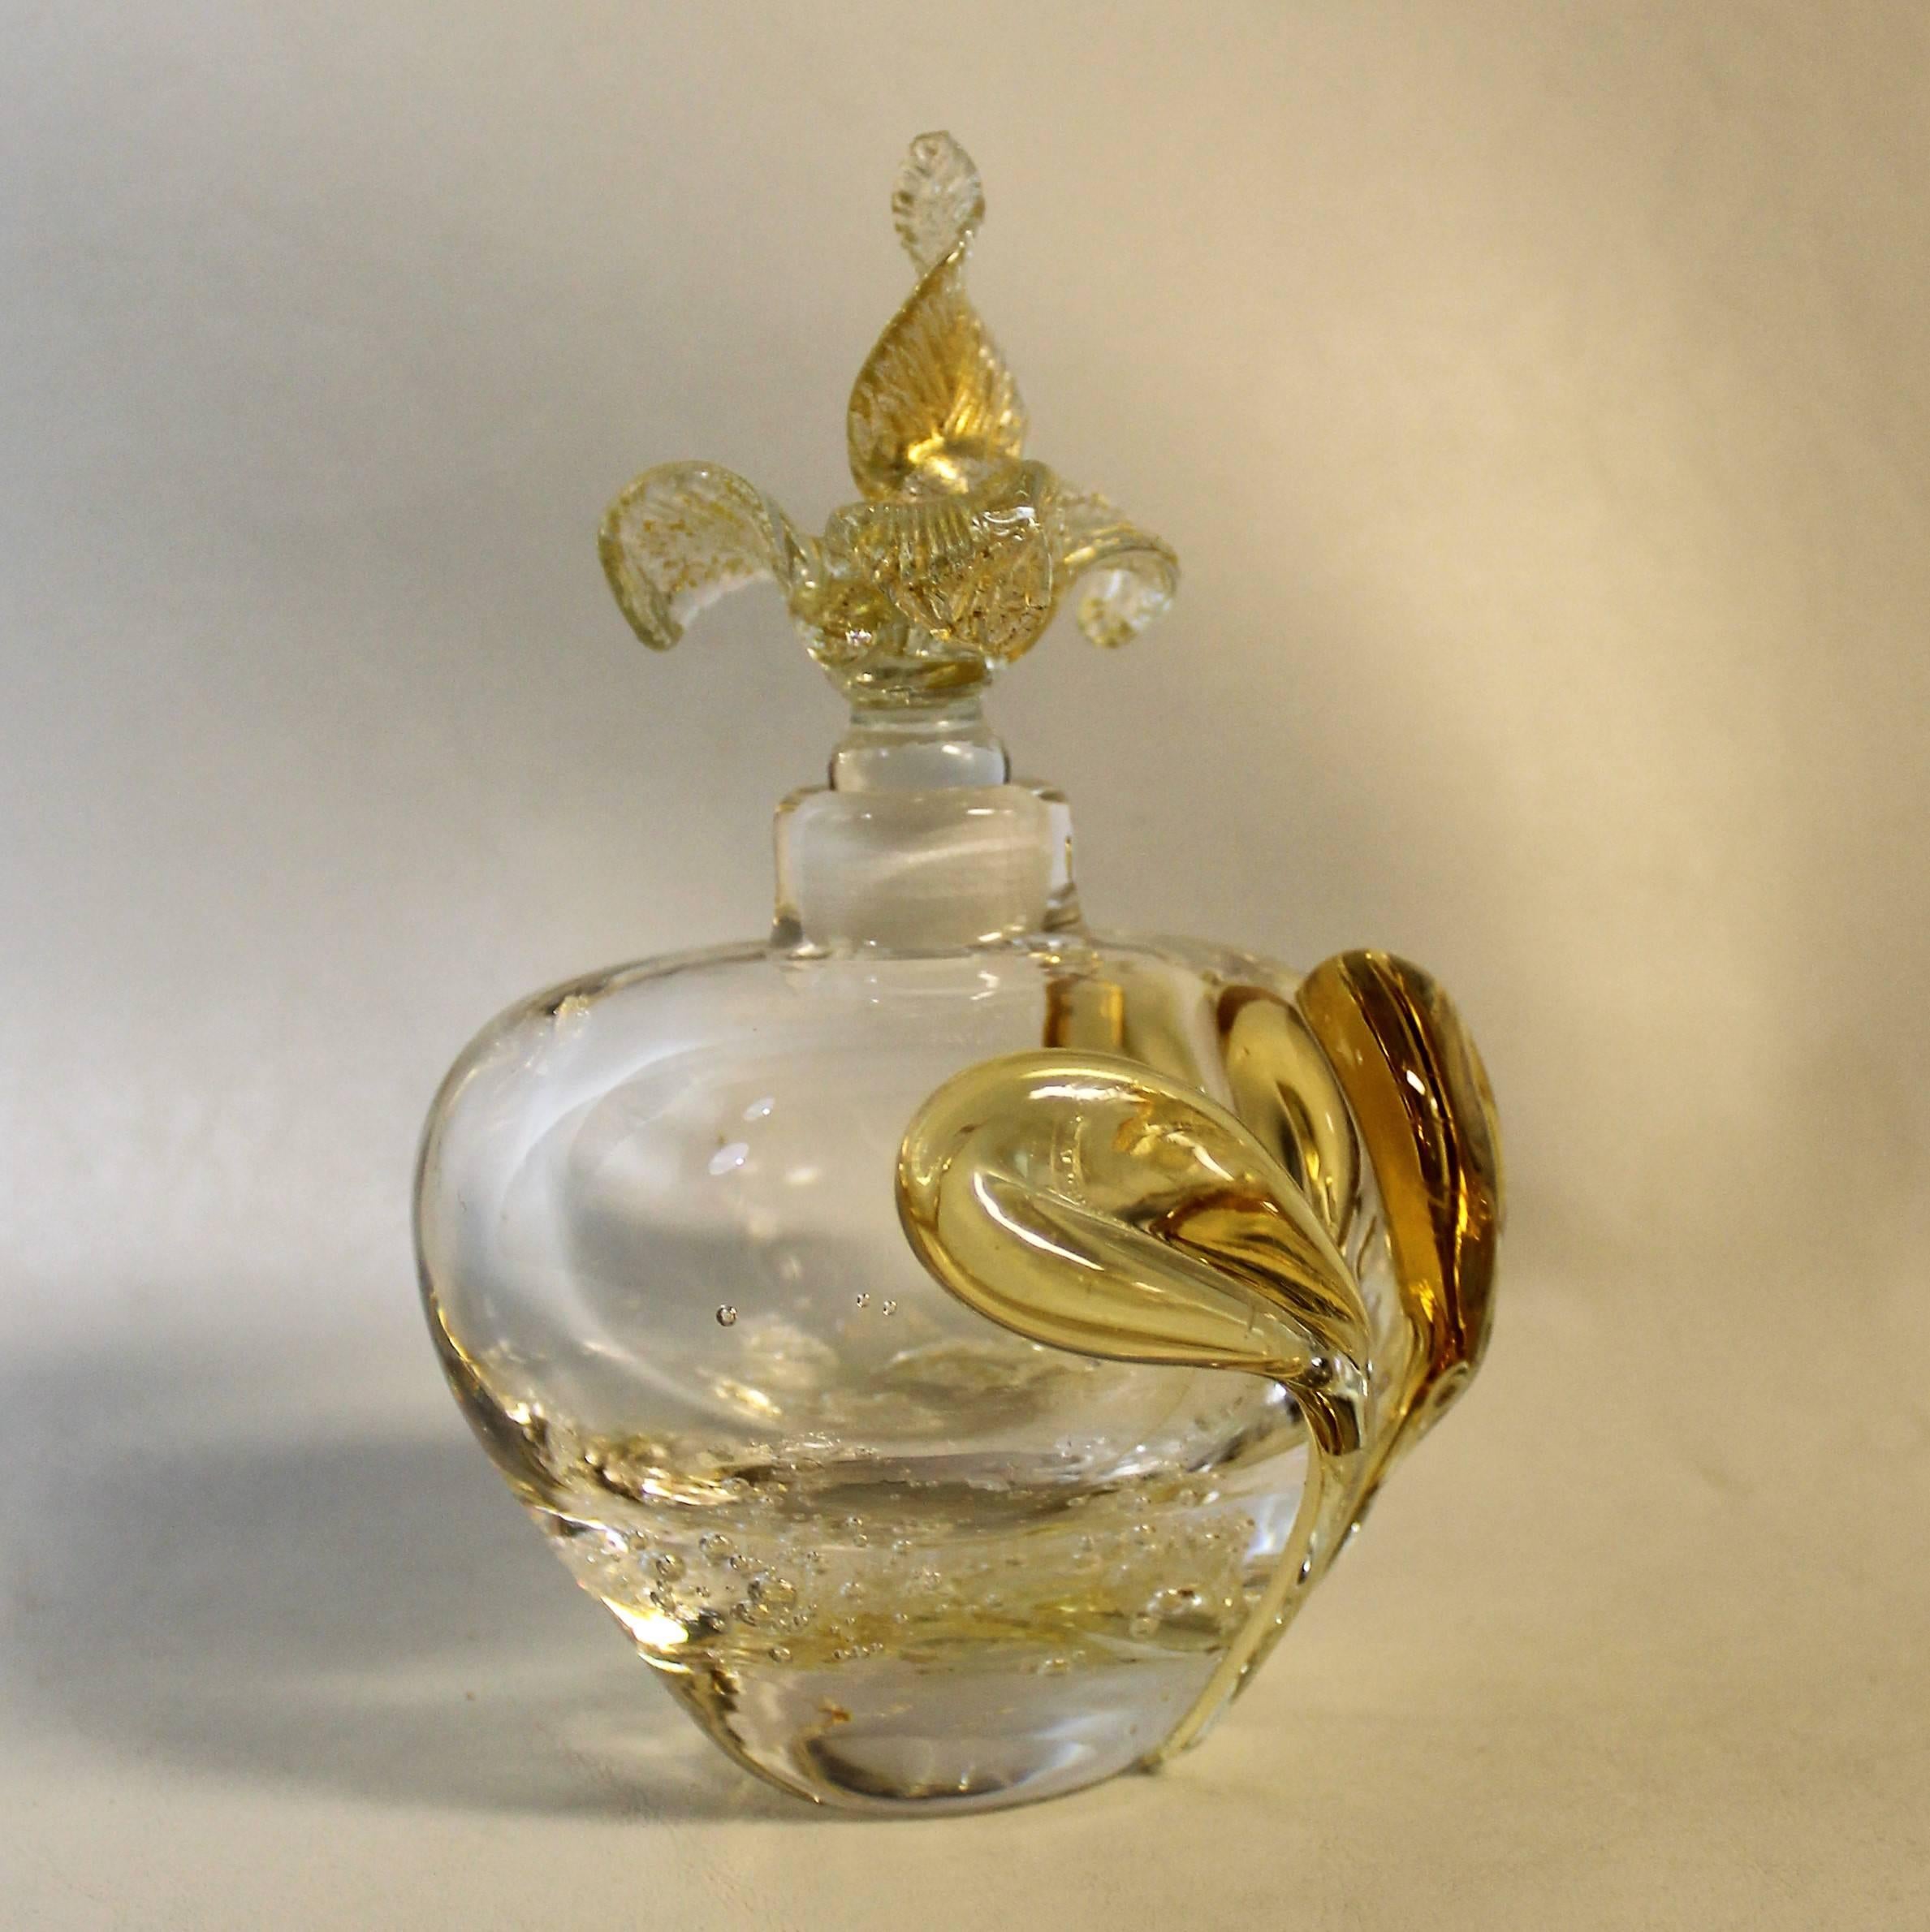 Murano perfume bottle with gold flecks attributed to Barovier e Toso.